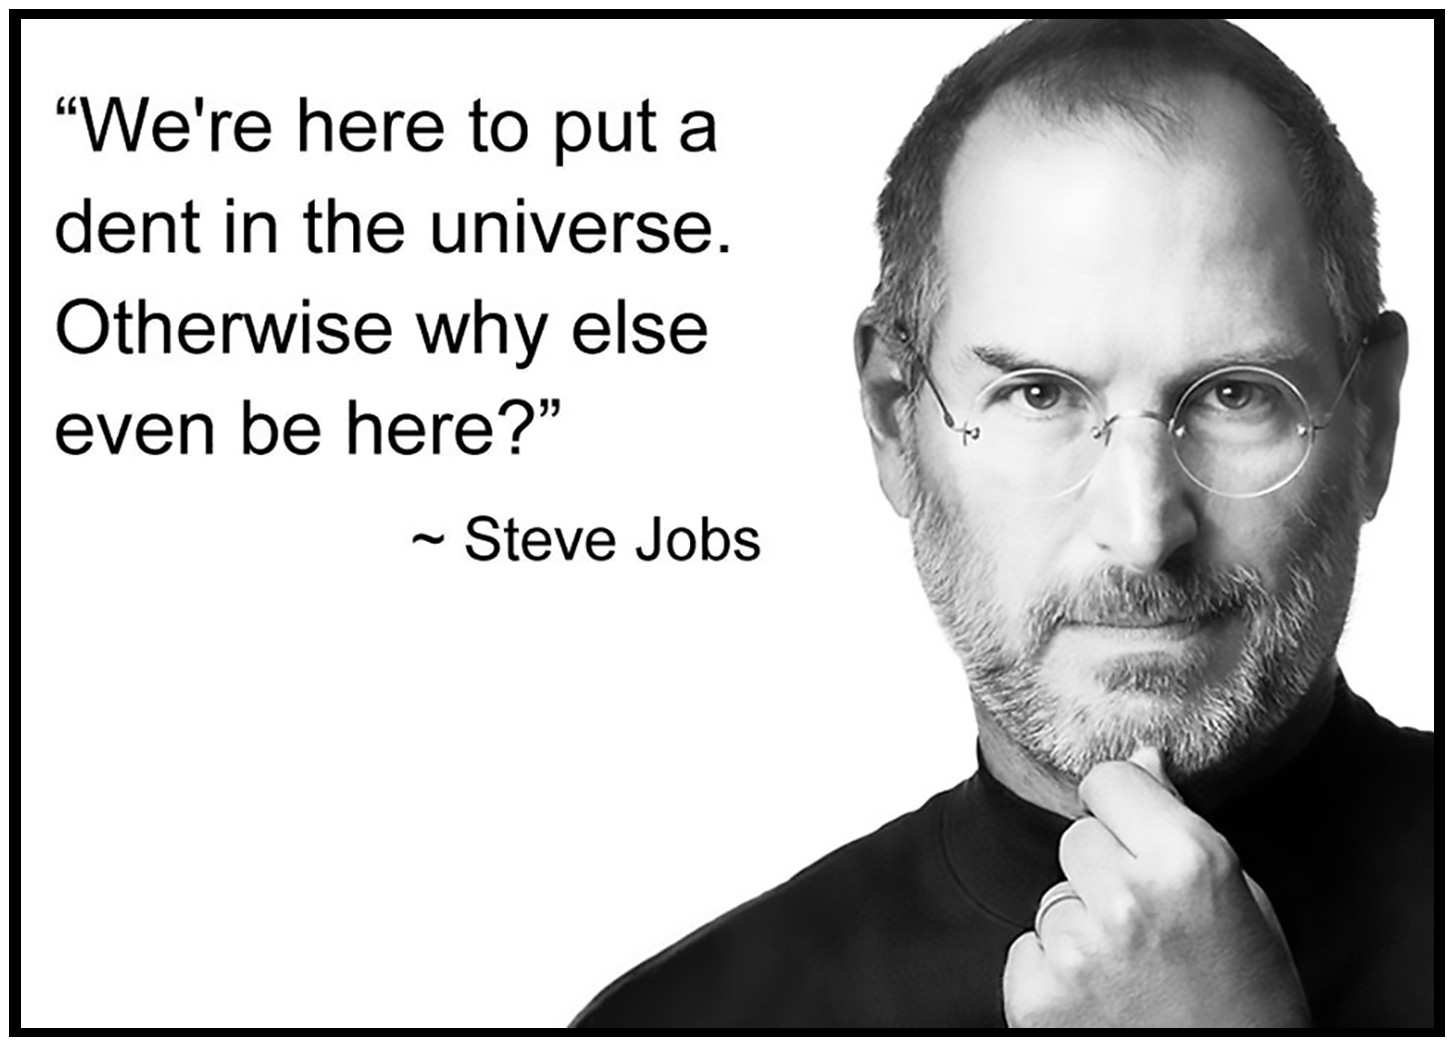 "We're here to put a dent in the universe" Steve Jobs